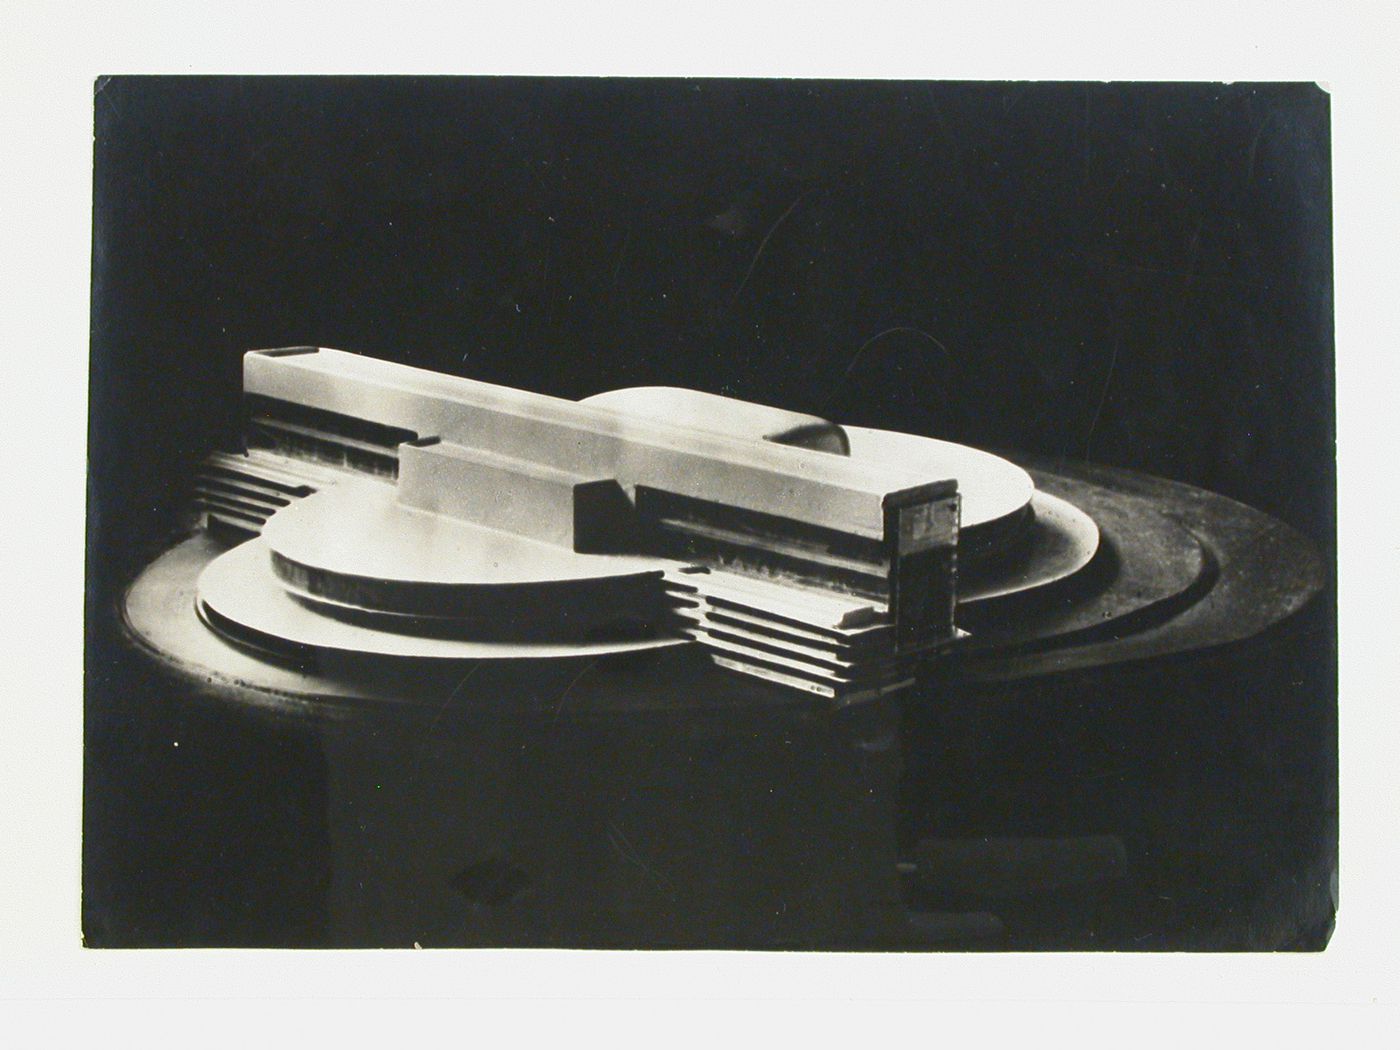 Photograph of a model for the second round of competition for a "synthetic theater" in Sverdlovsk, Soviet Union (now Ekaterinburg, Russia)